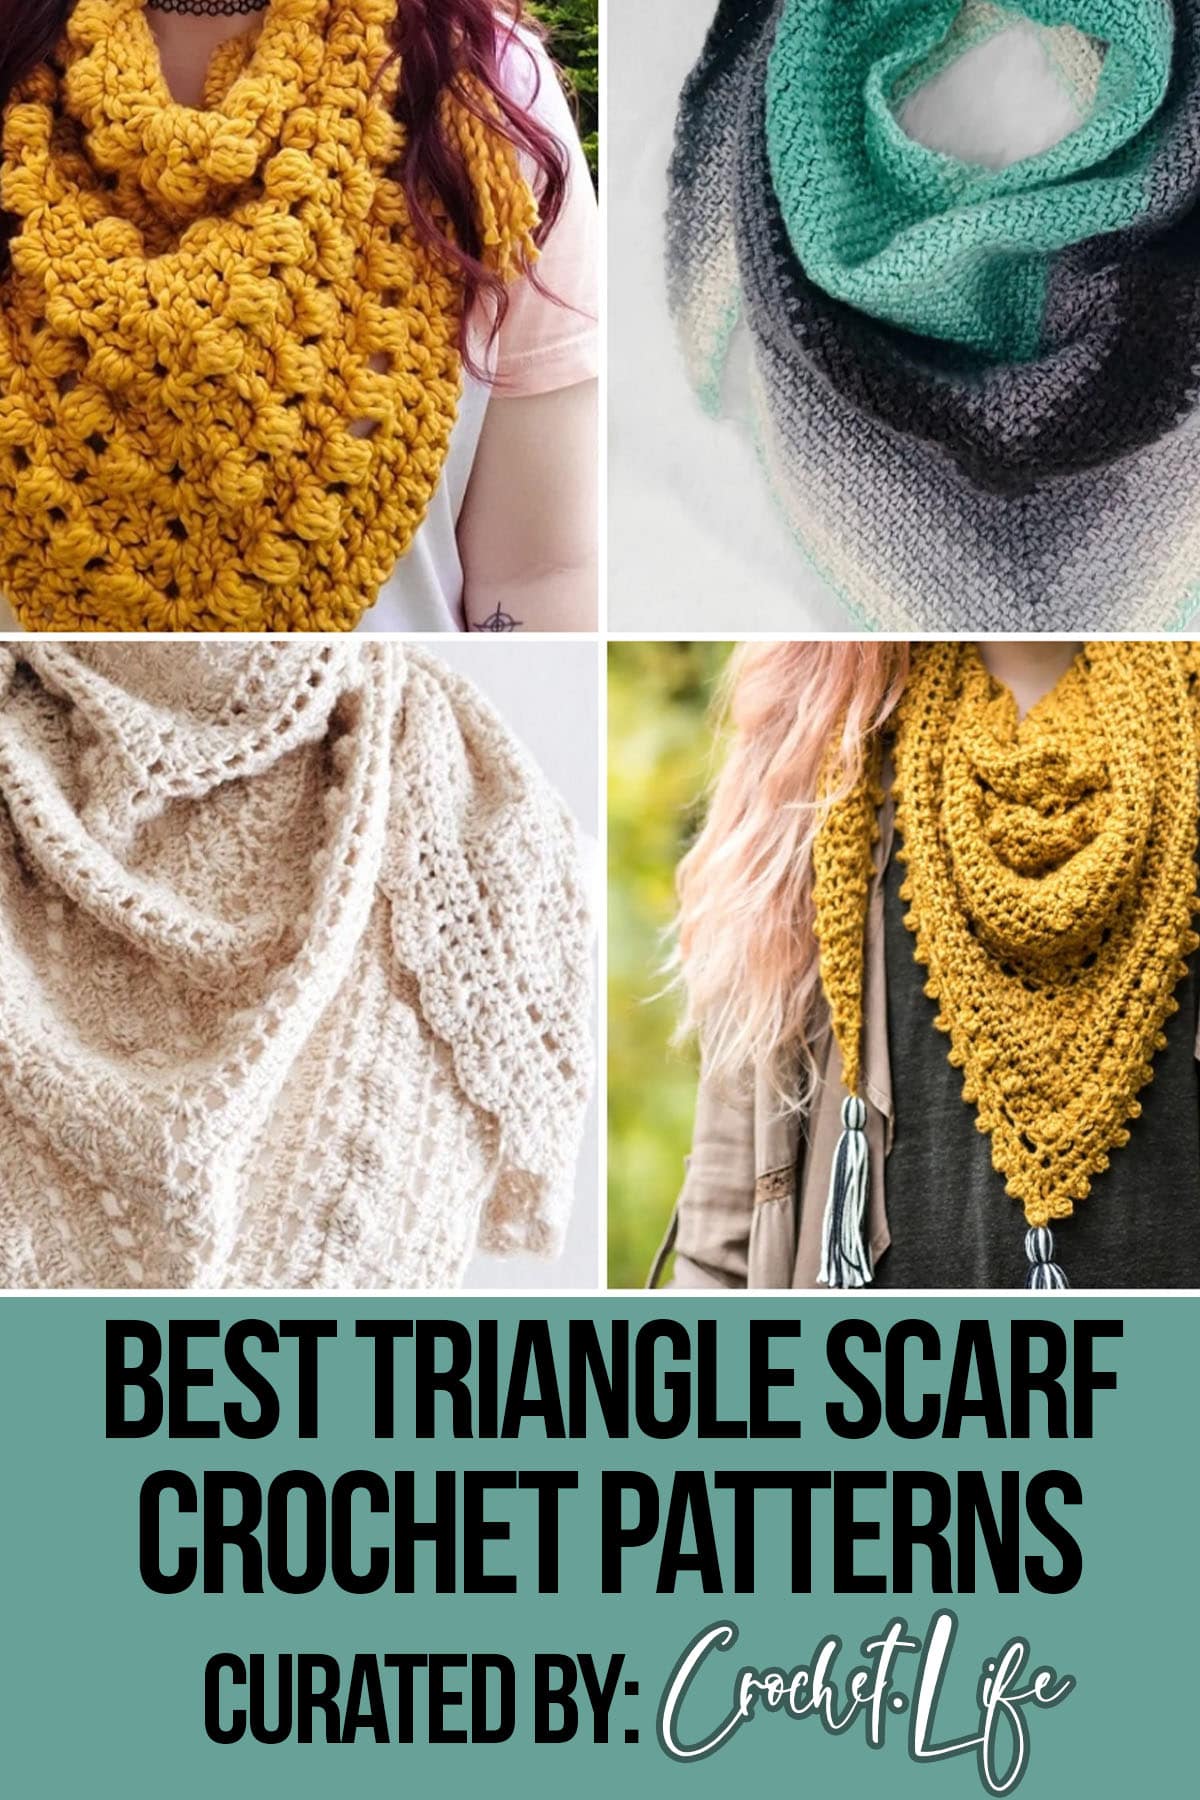 photo collage of triangle scarf crochet patterns with text which reads best triangle scarf crochet patterns curated by crochet.life